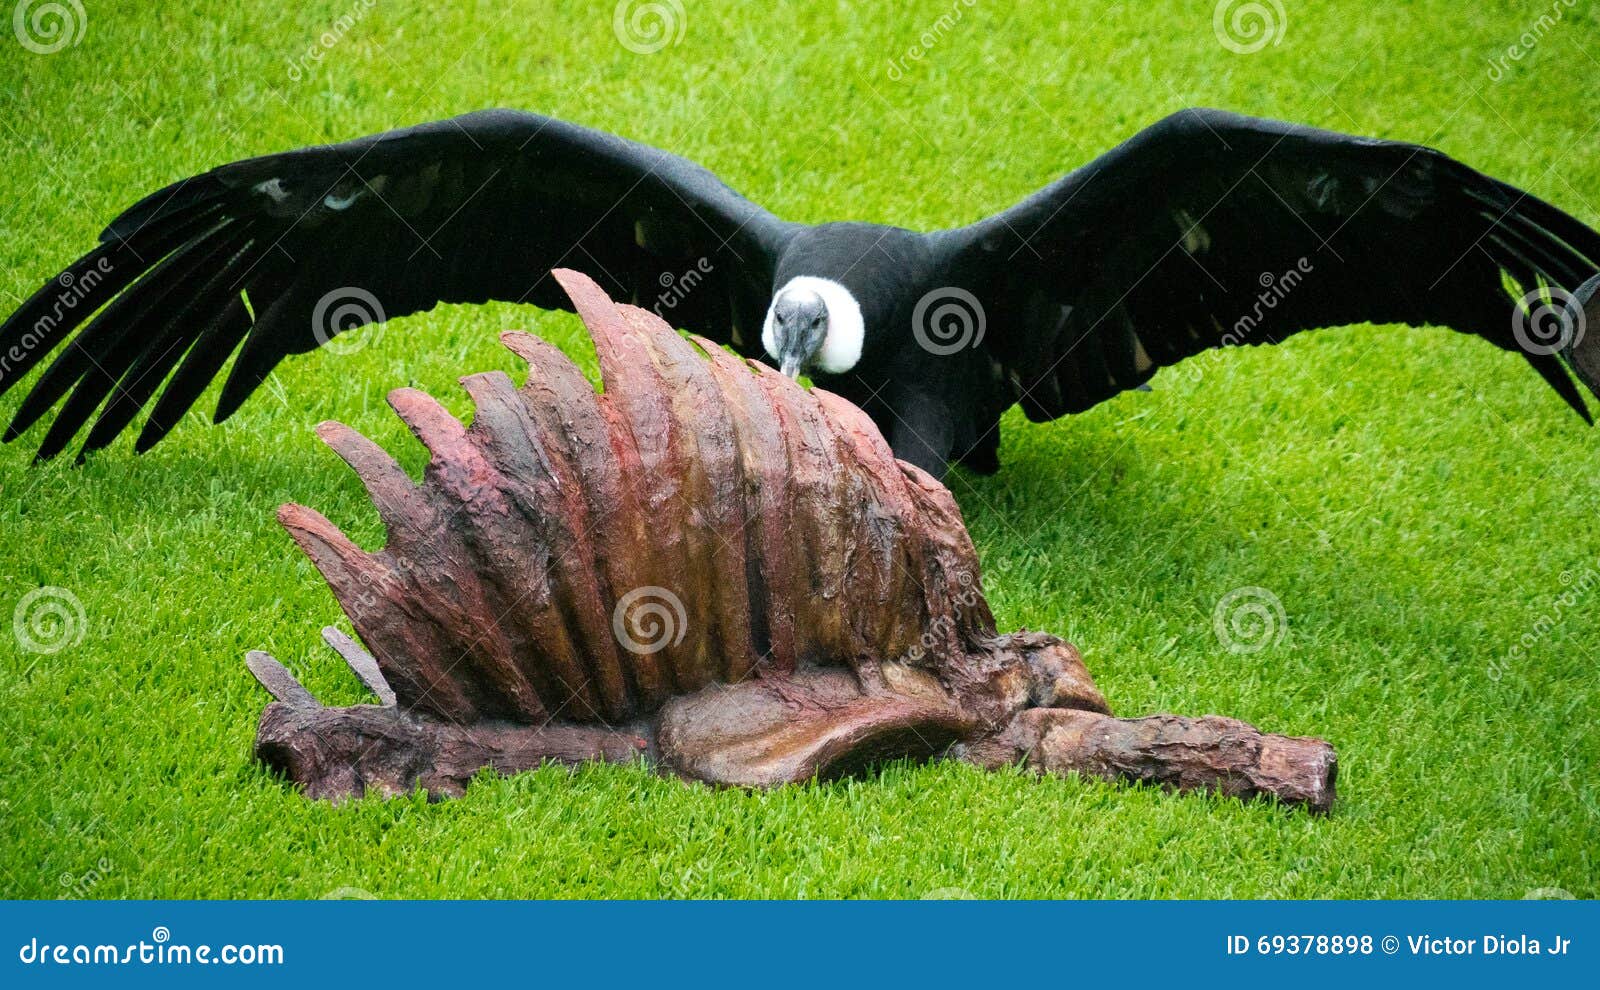 Animal carcass stock photo. Image of ribs, meat, death - 69378898